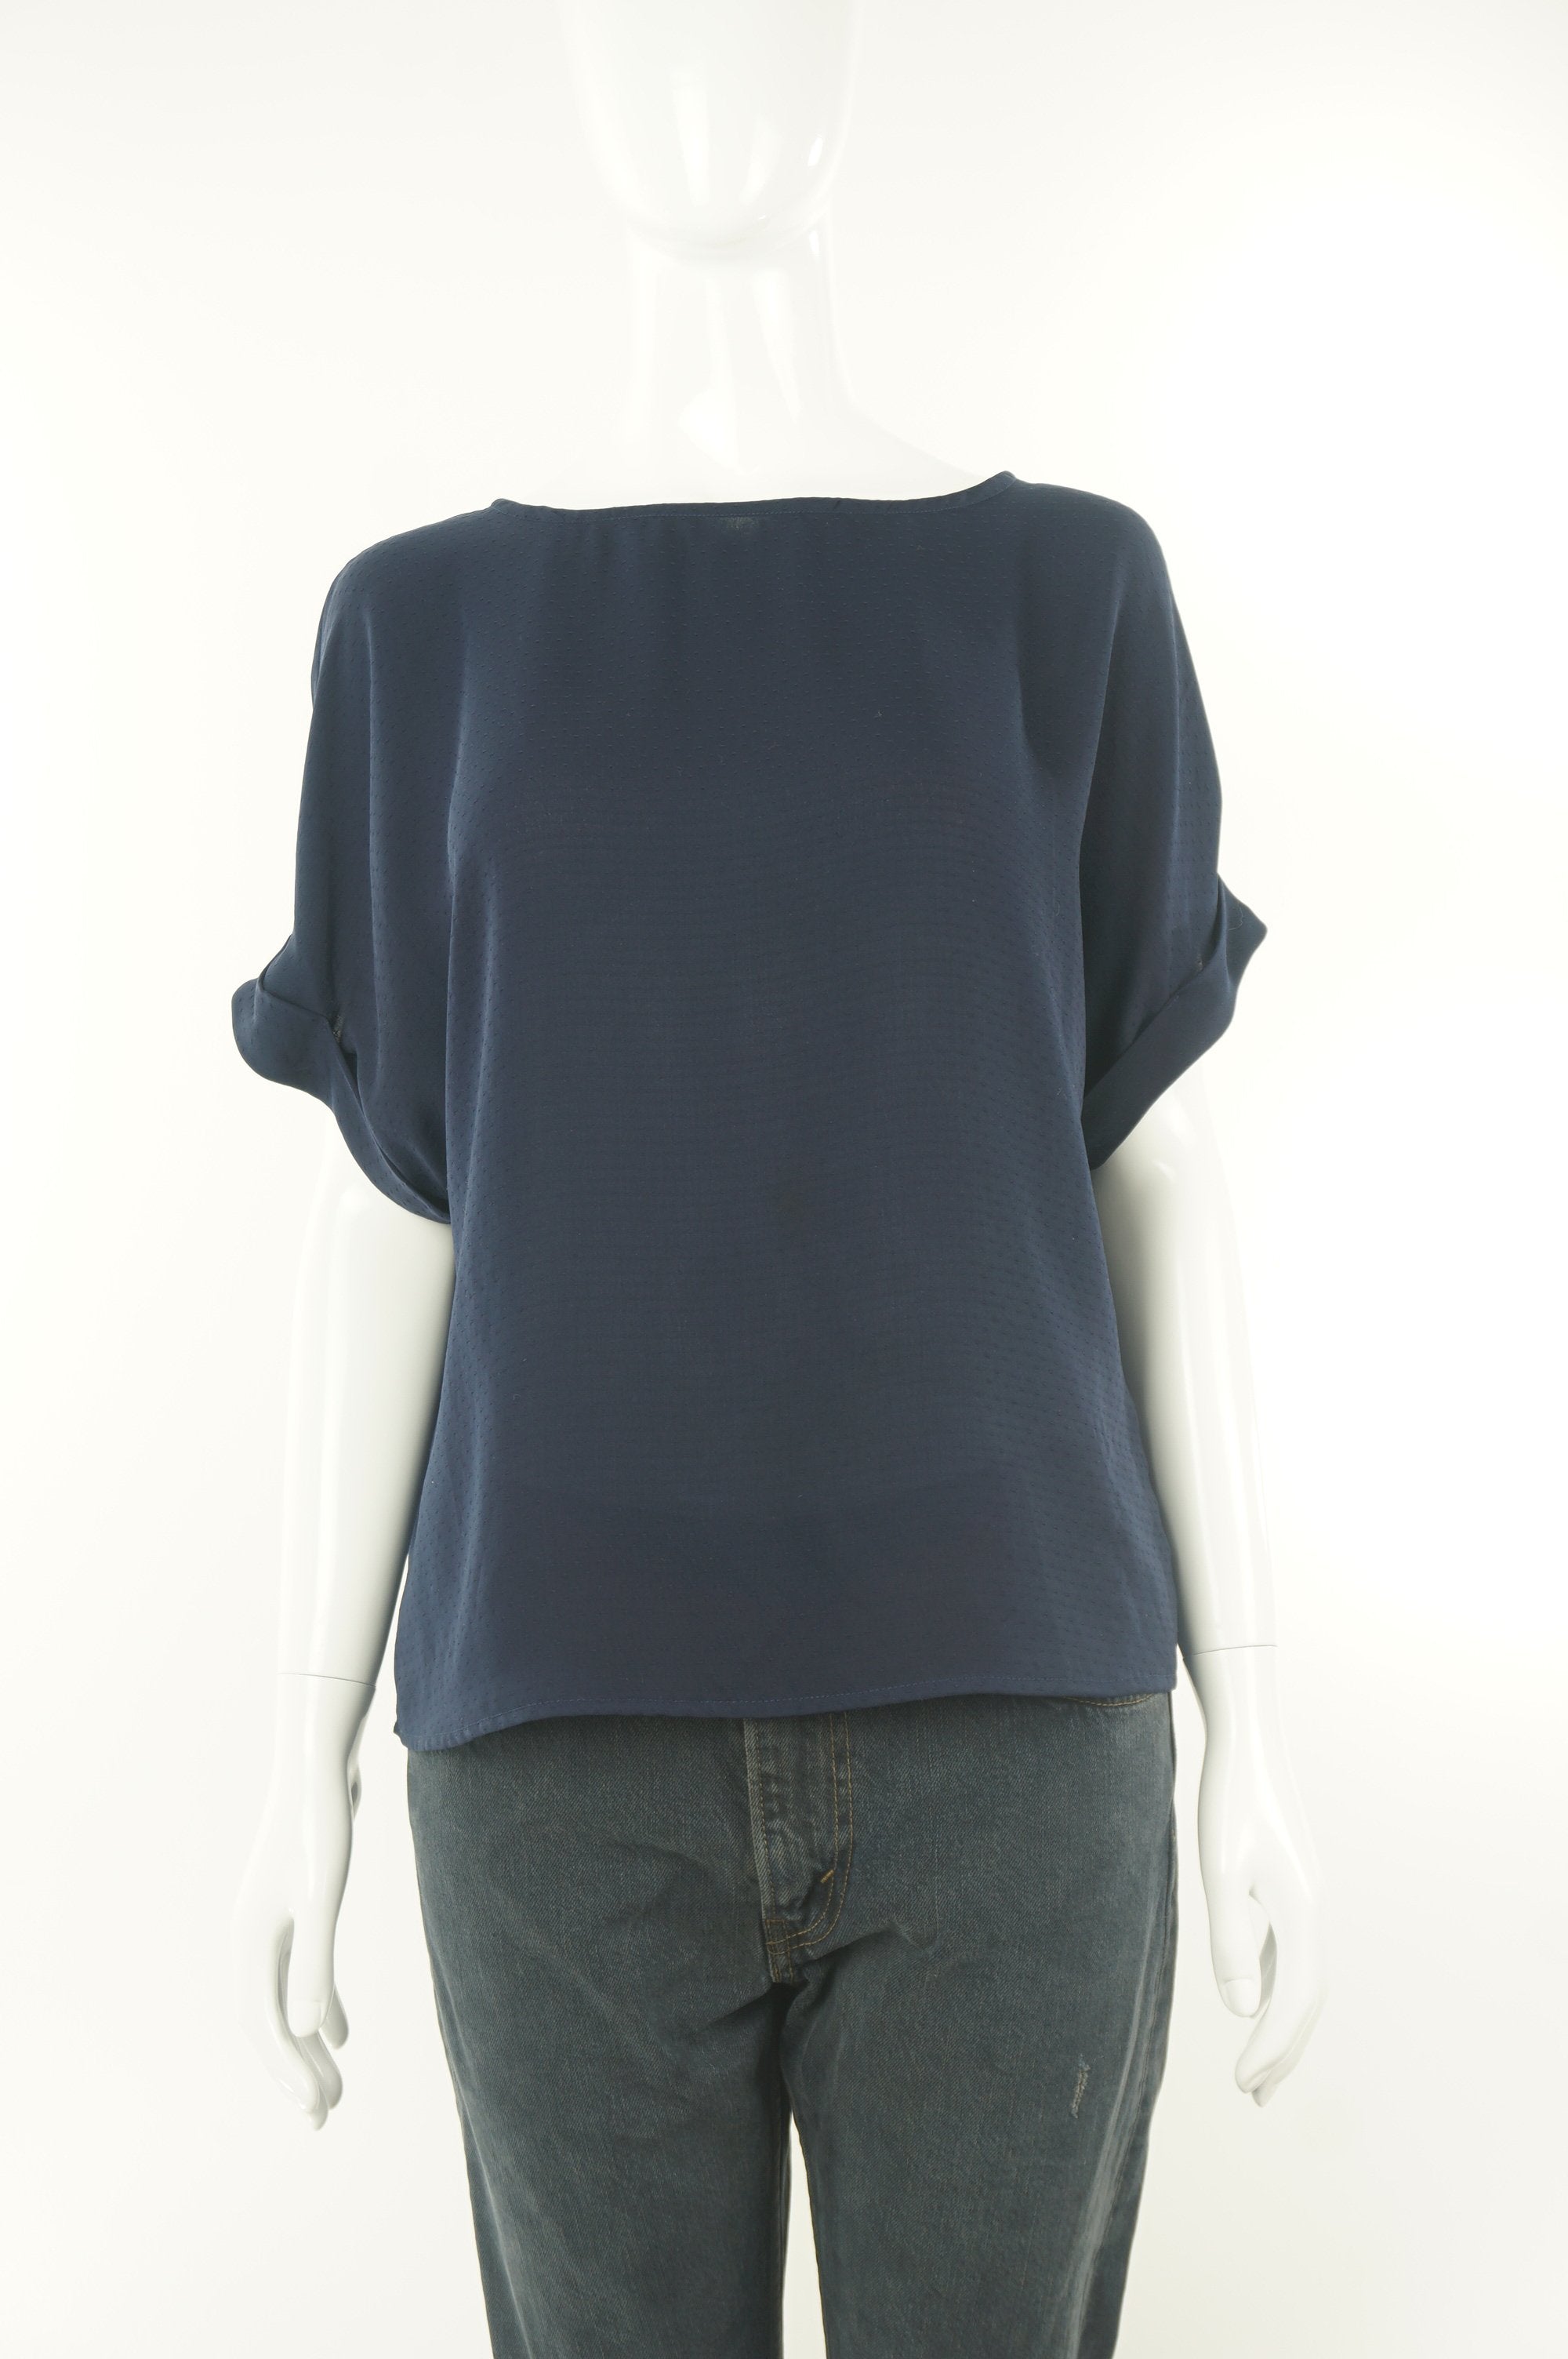 Dynamite Basic and comfy cuffed sleeve navy top, Add the casual and comfortable aspect to your work wardrobe with this cute cuffed sleeves shirt, Blue, 100% Polyester, women's Tops, women's Blue Tops, Dynamite women's Tops, dynamite dark blue top, women's navy blue blouse, women's shirt with folded short sleeves